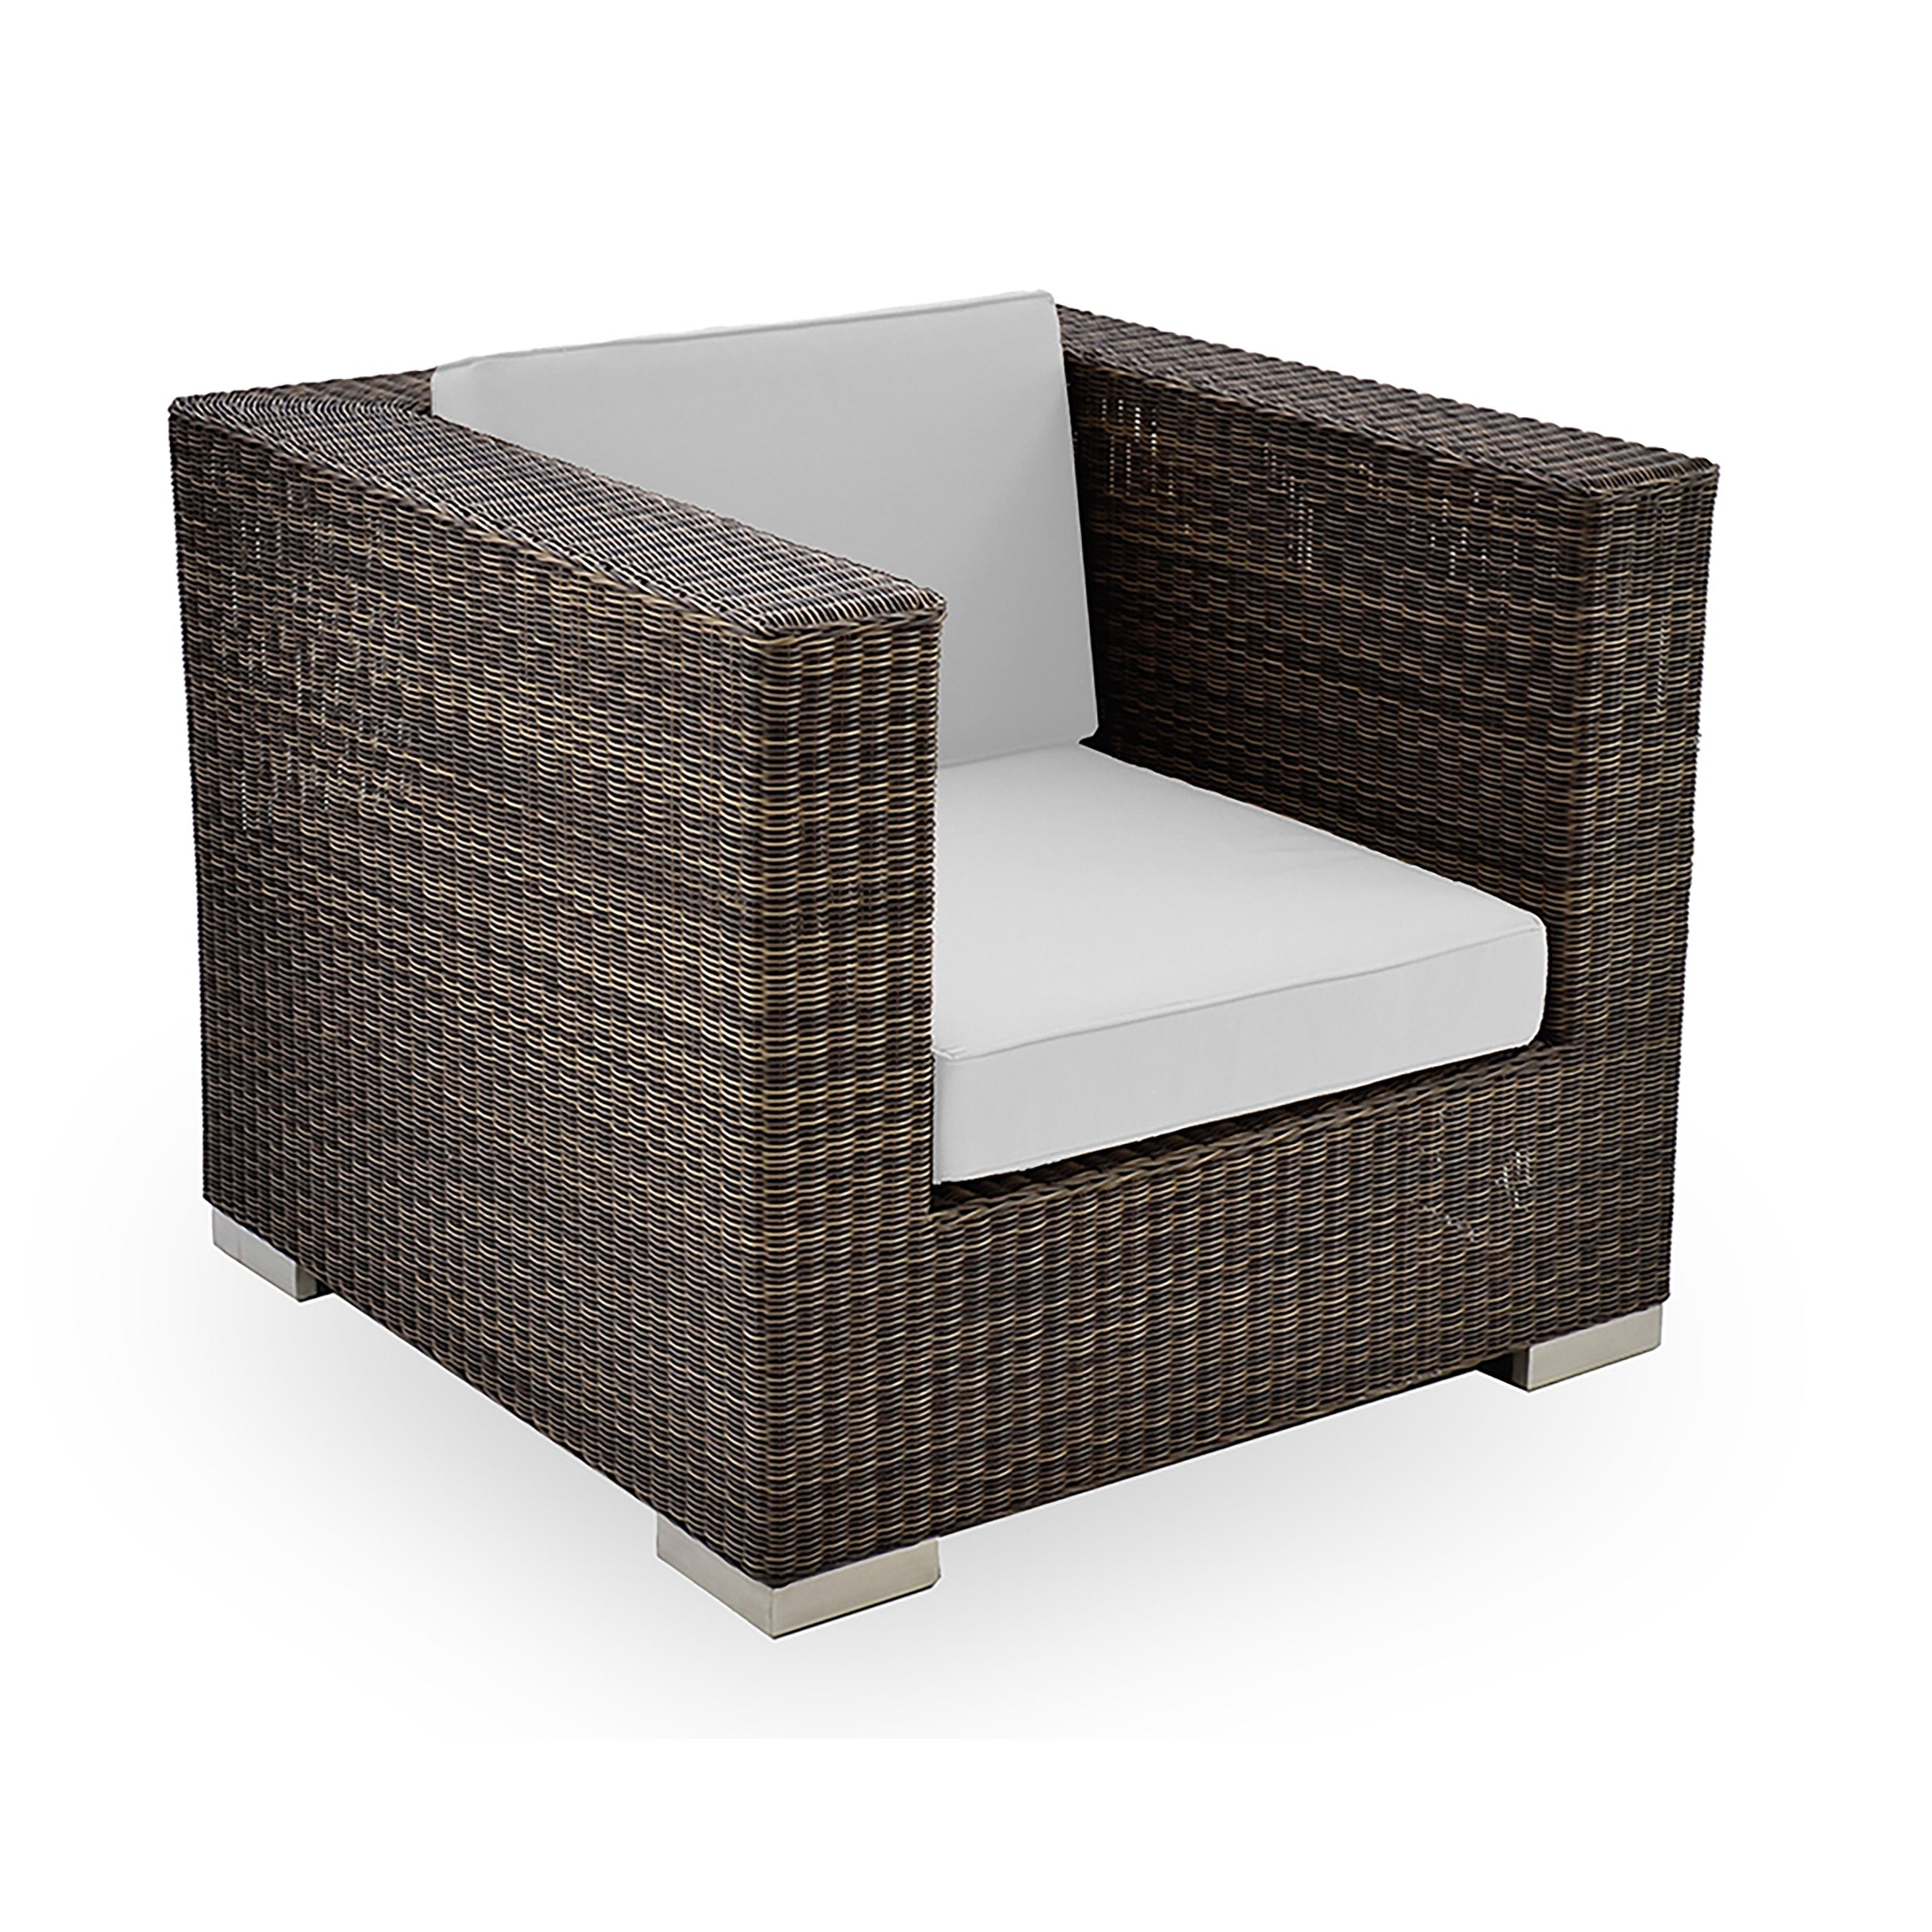 Cuba lounge chair with white outdoor cushions